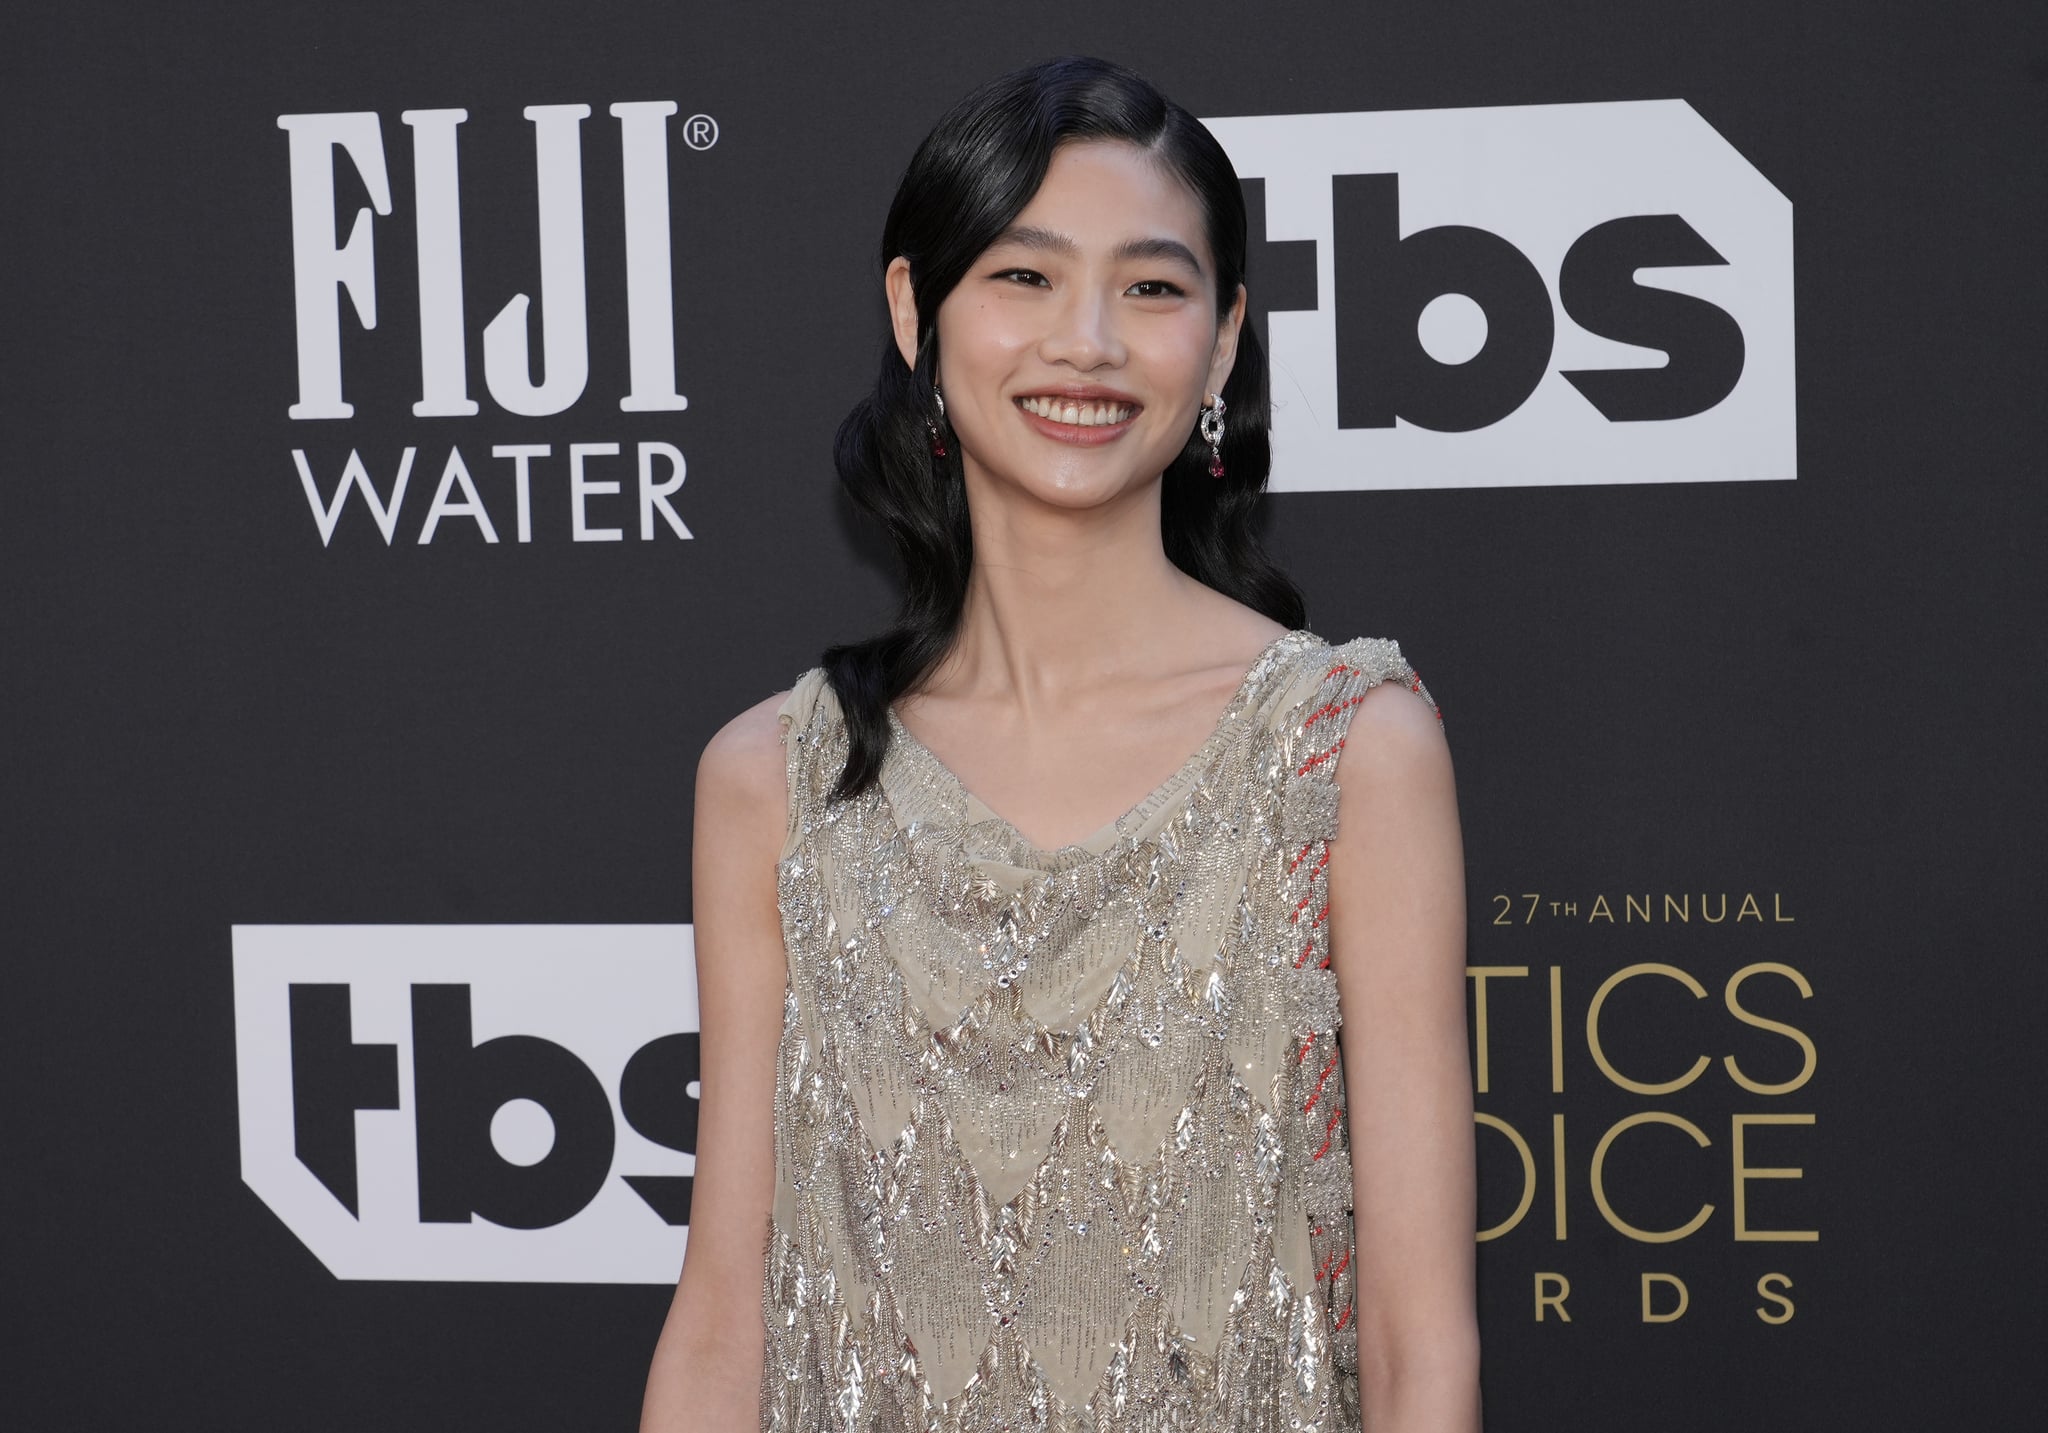 LOS ANGELES, CALIFORNIA - MARCH 13: HoYeon Jung attends the 27th Annual Critics Choice Awards at Fairmont Century Plaza on March 13, 2022 in Los Angeles, California. (Photo by Jeff Kravitz/FilmMagic)